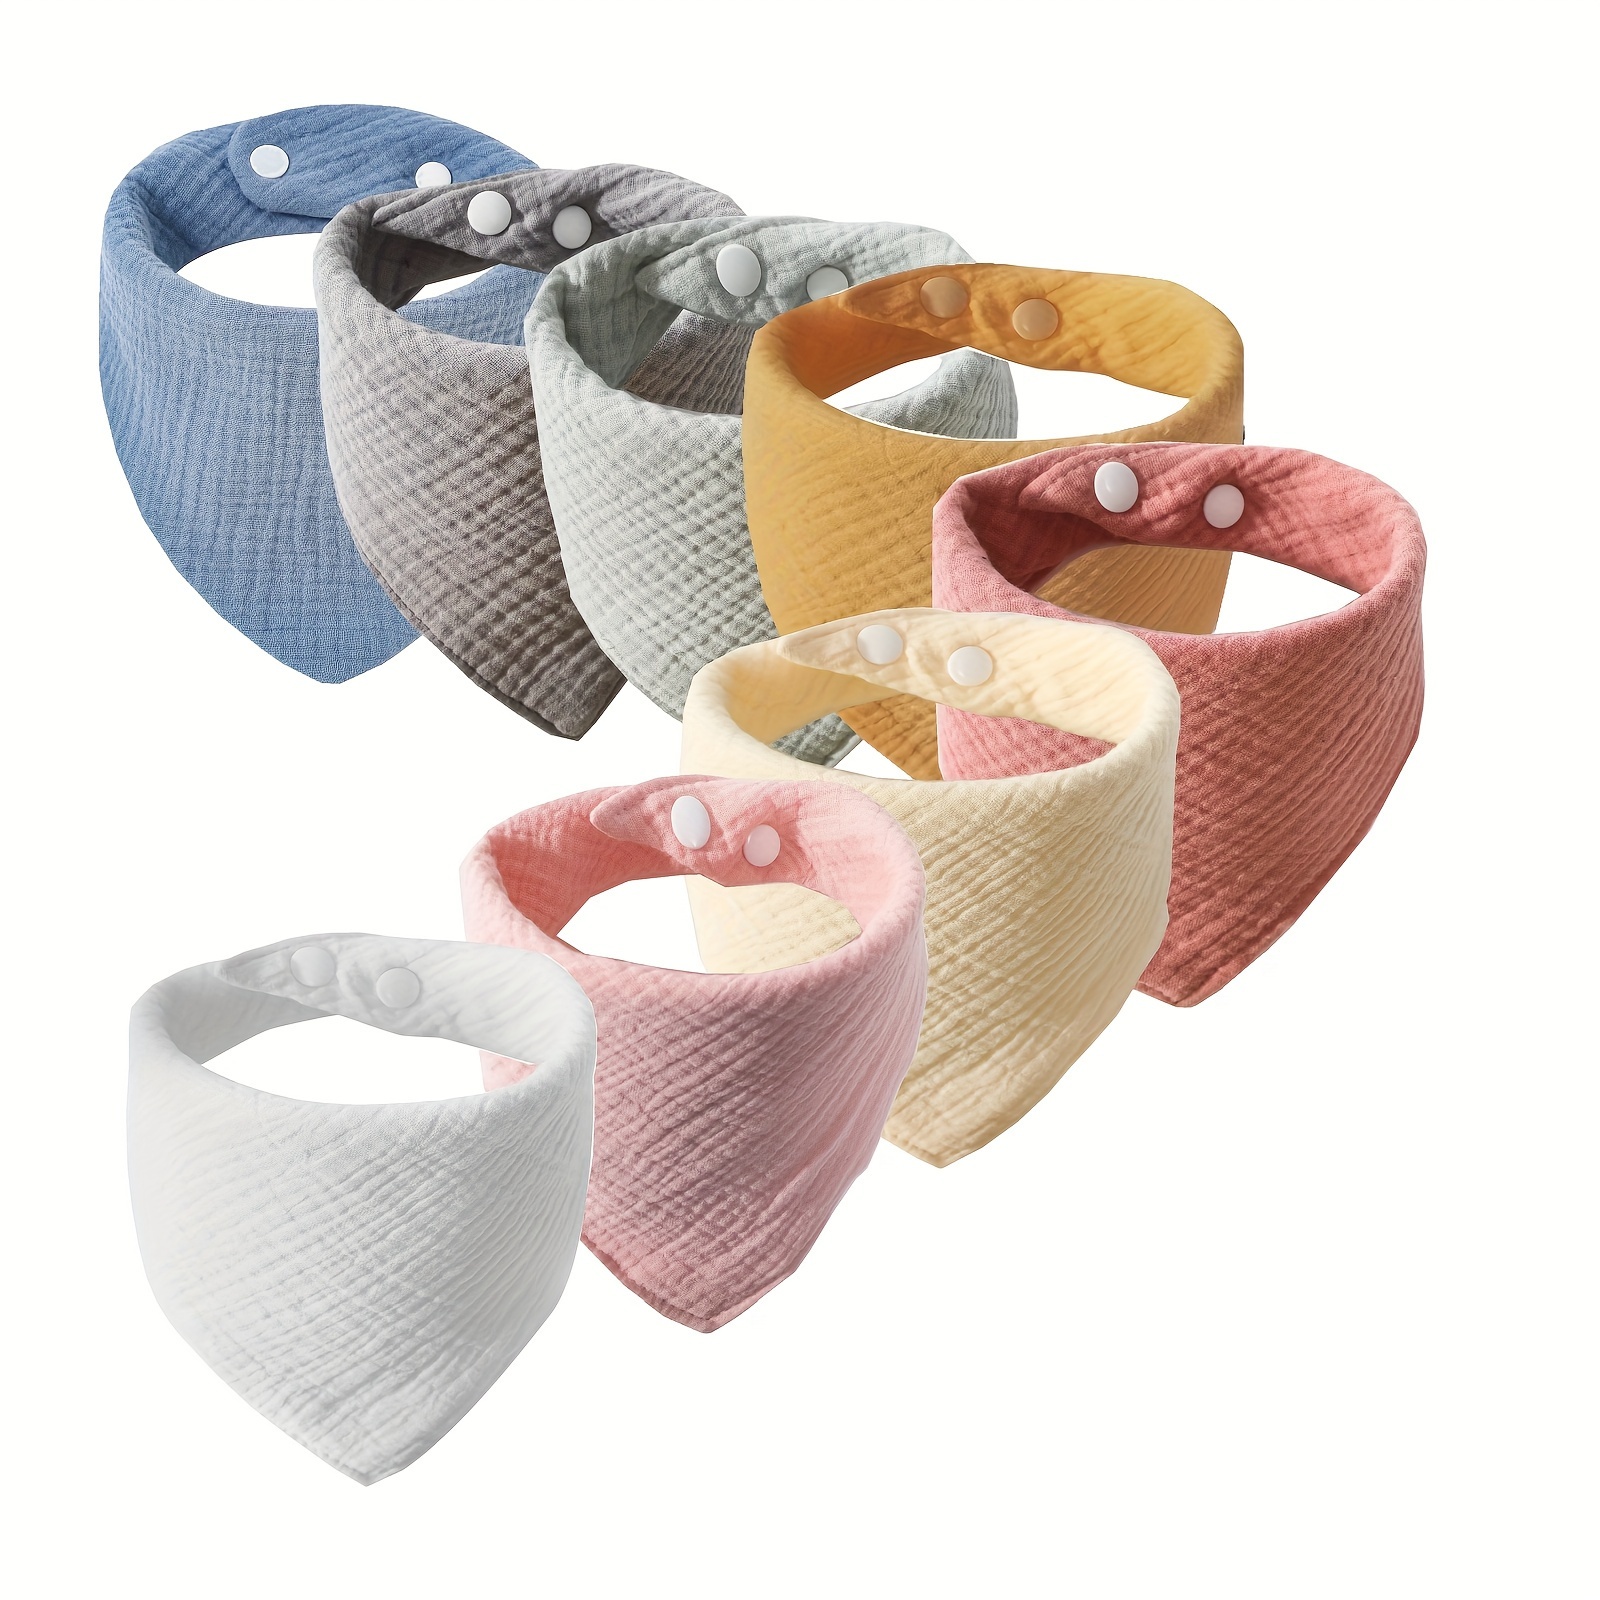 

3/5pcs Plain Color Feeding Bibs For Teething And Drooling, 4-layer Soft Absorbent Bandana Bibs